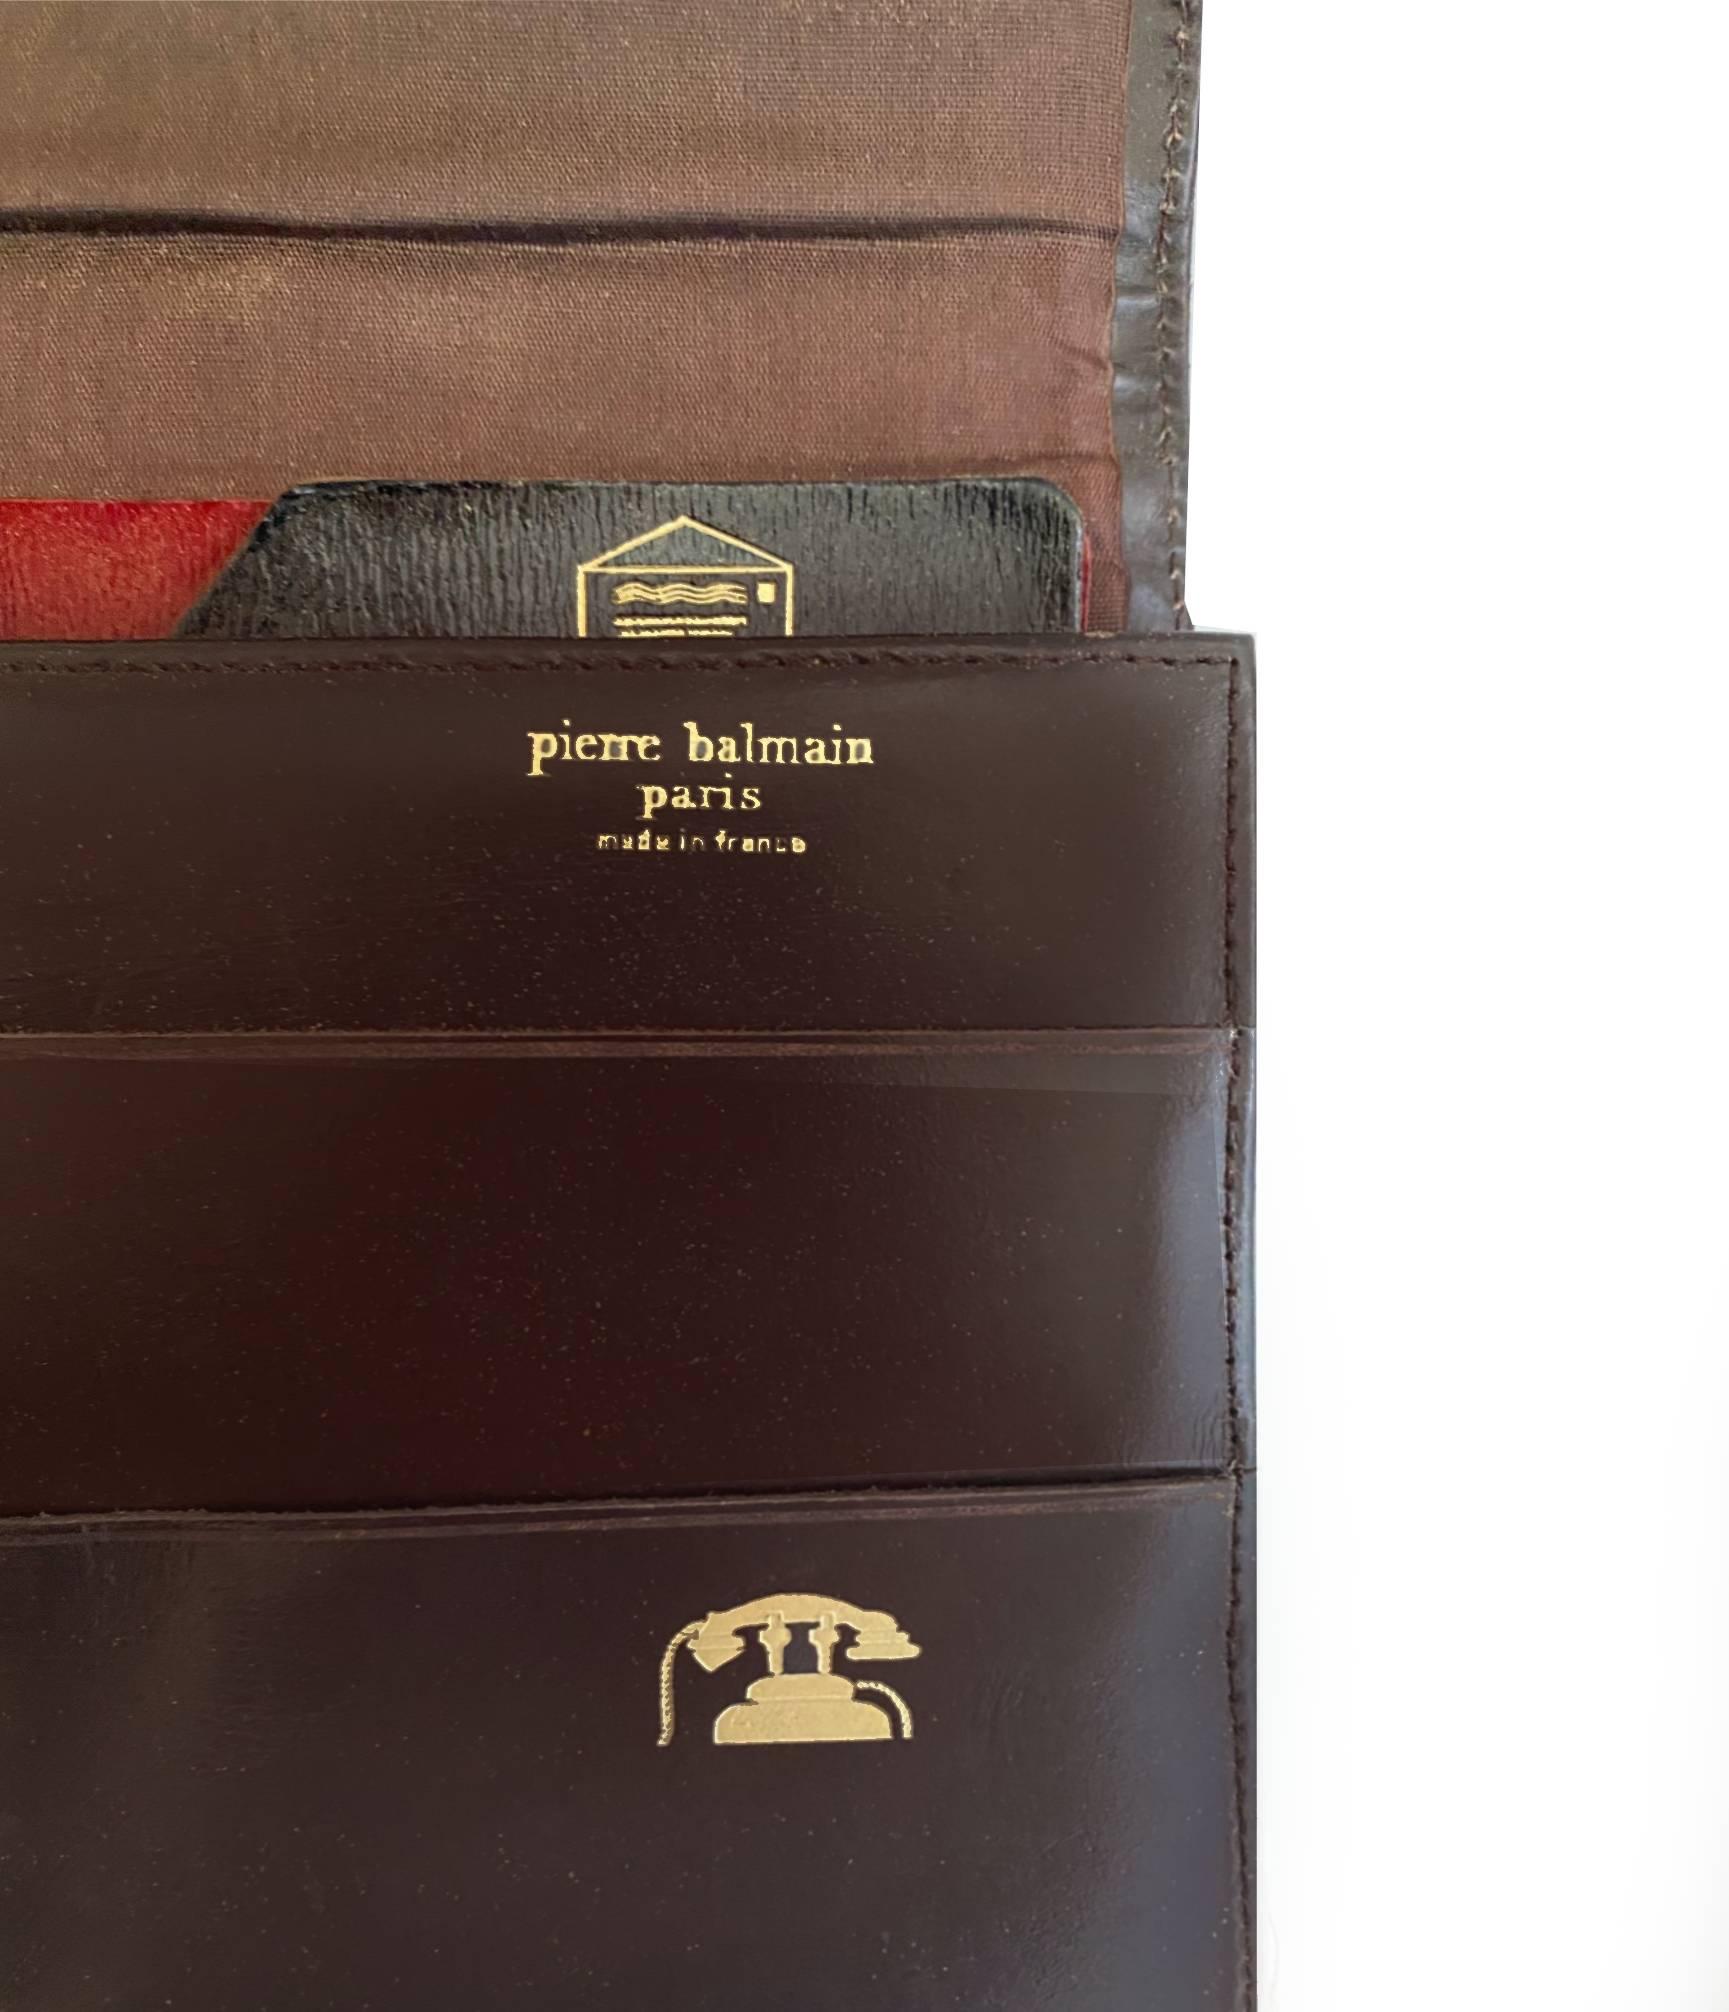 1970s PIERRE BALMAIN  Clutch Travel Document Holder  In Good Condition For Sale In London, GB